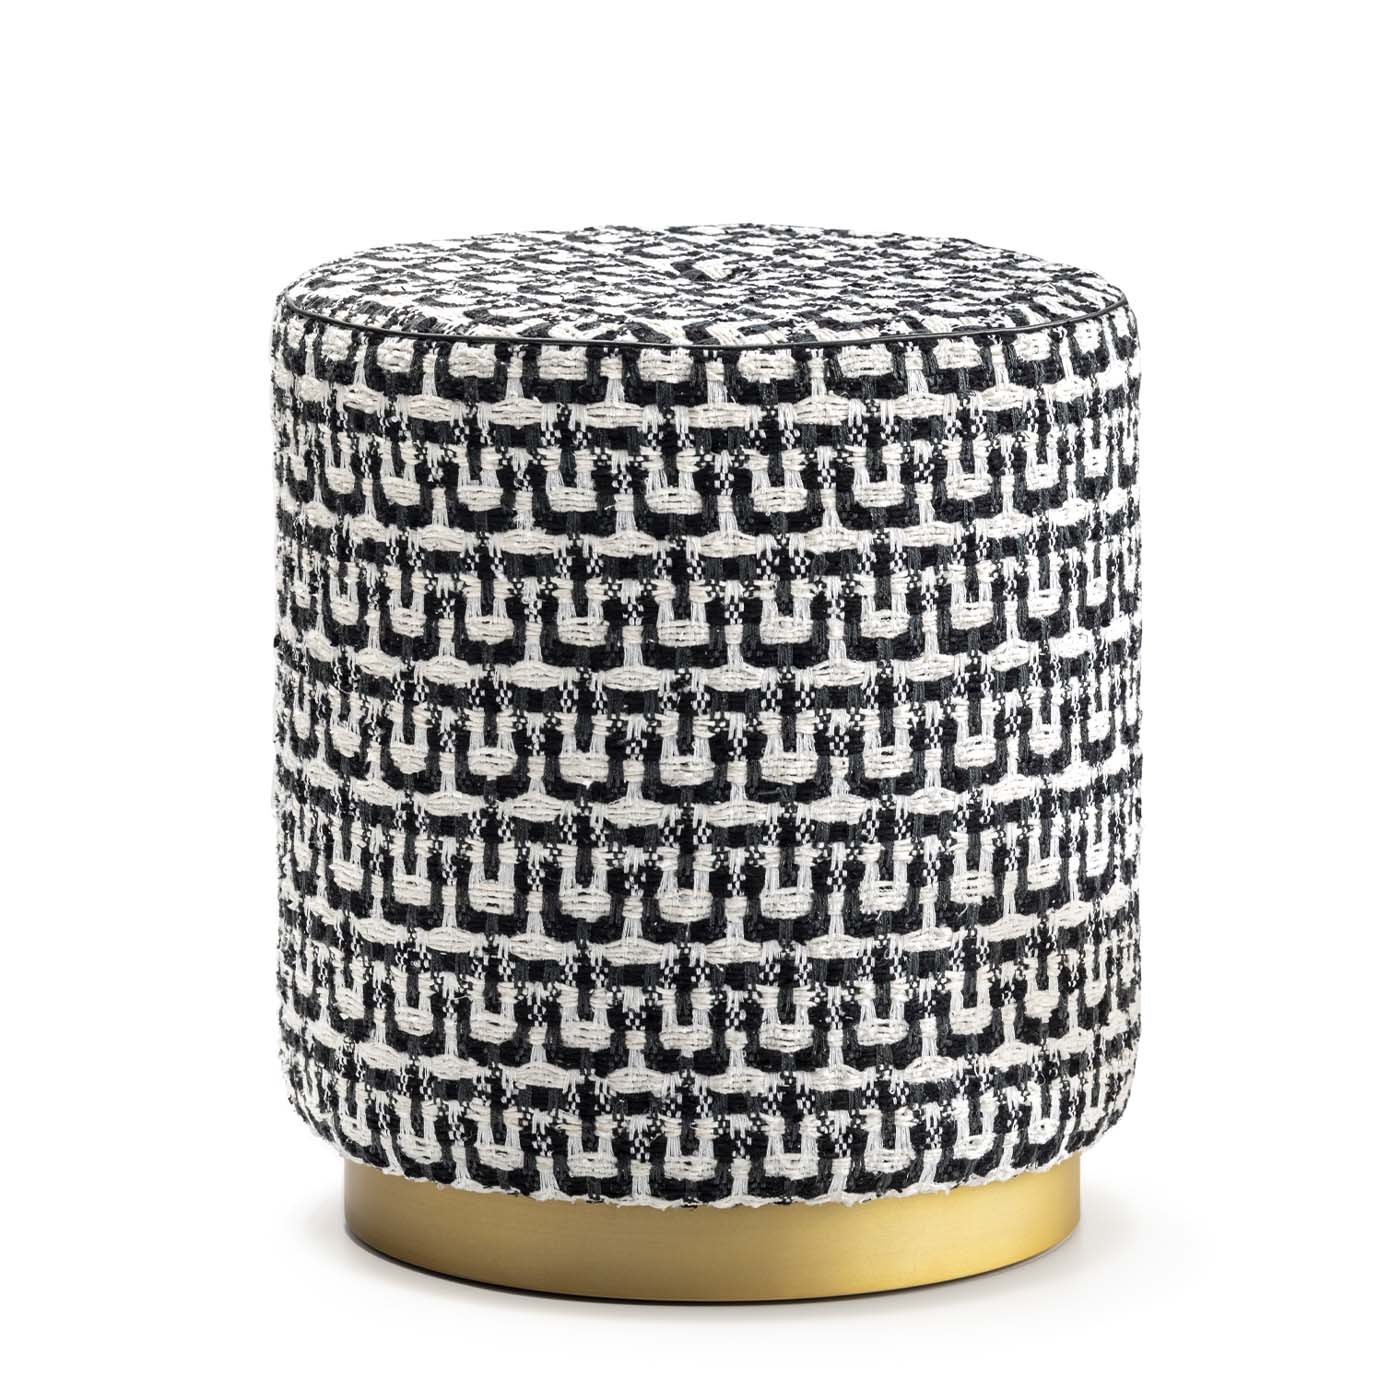 Sofas and seats - Olivia pouf in Marilù fabric with horn button 6052B - detail - Arcahorn